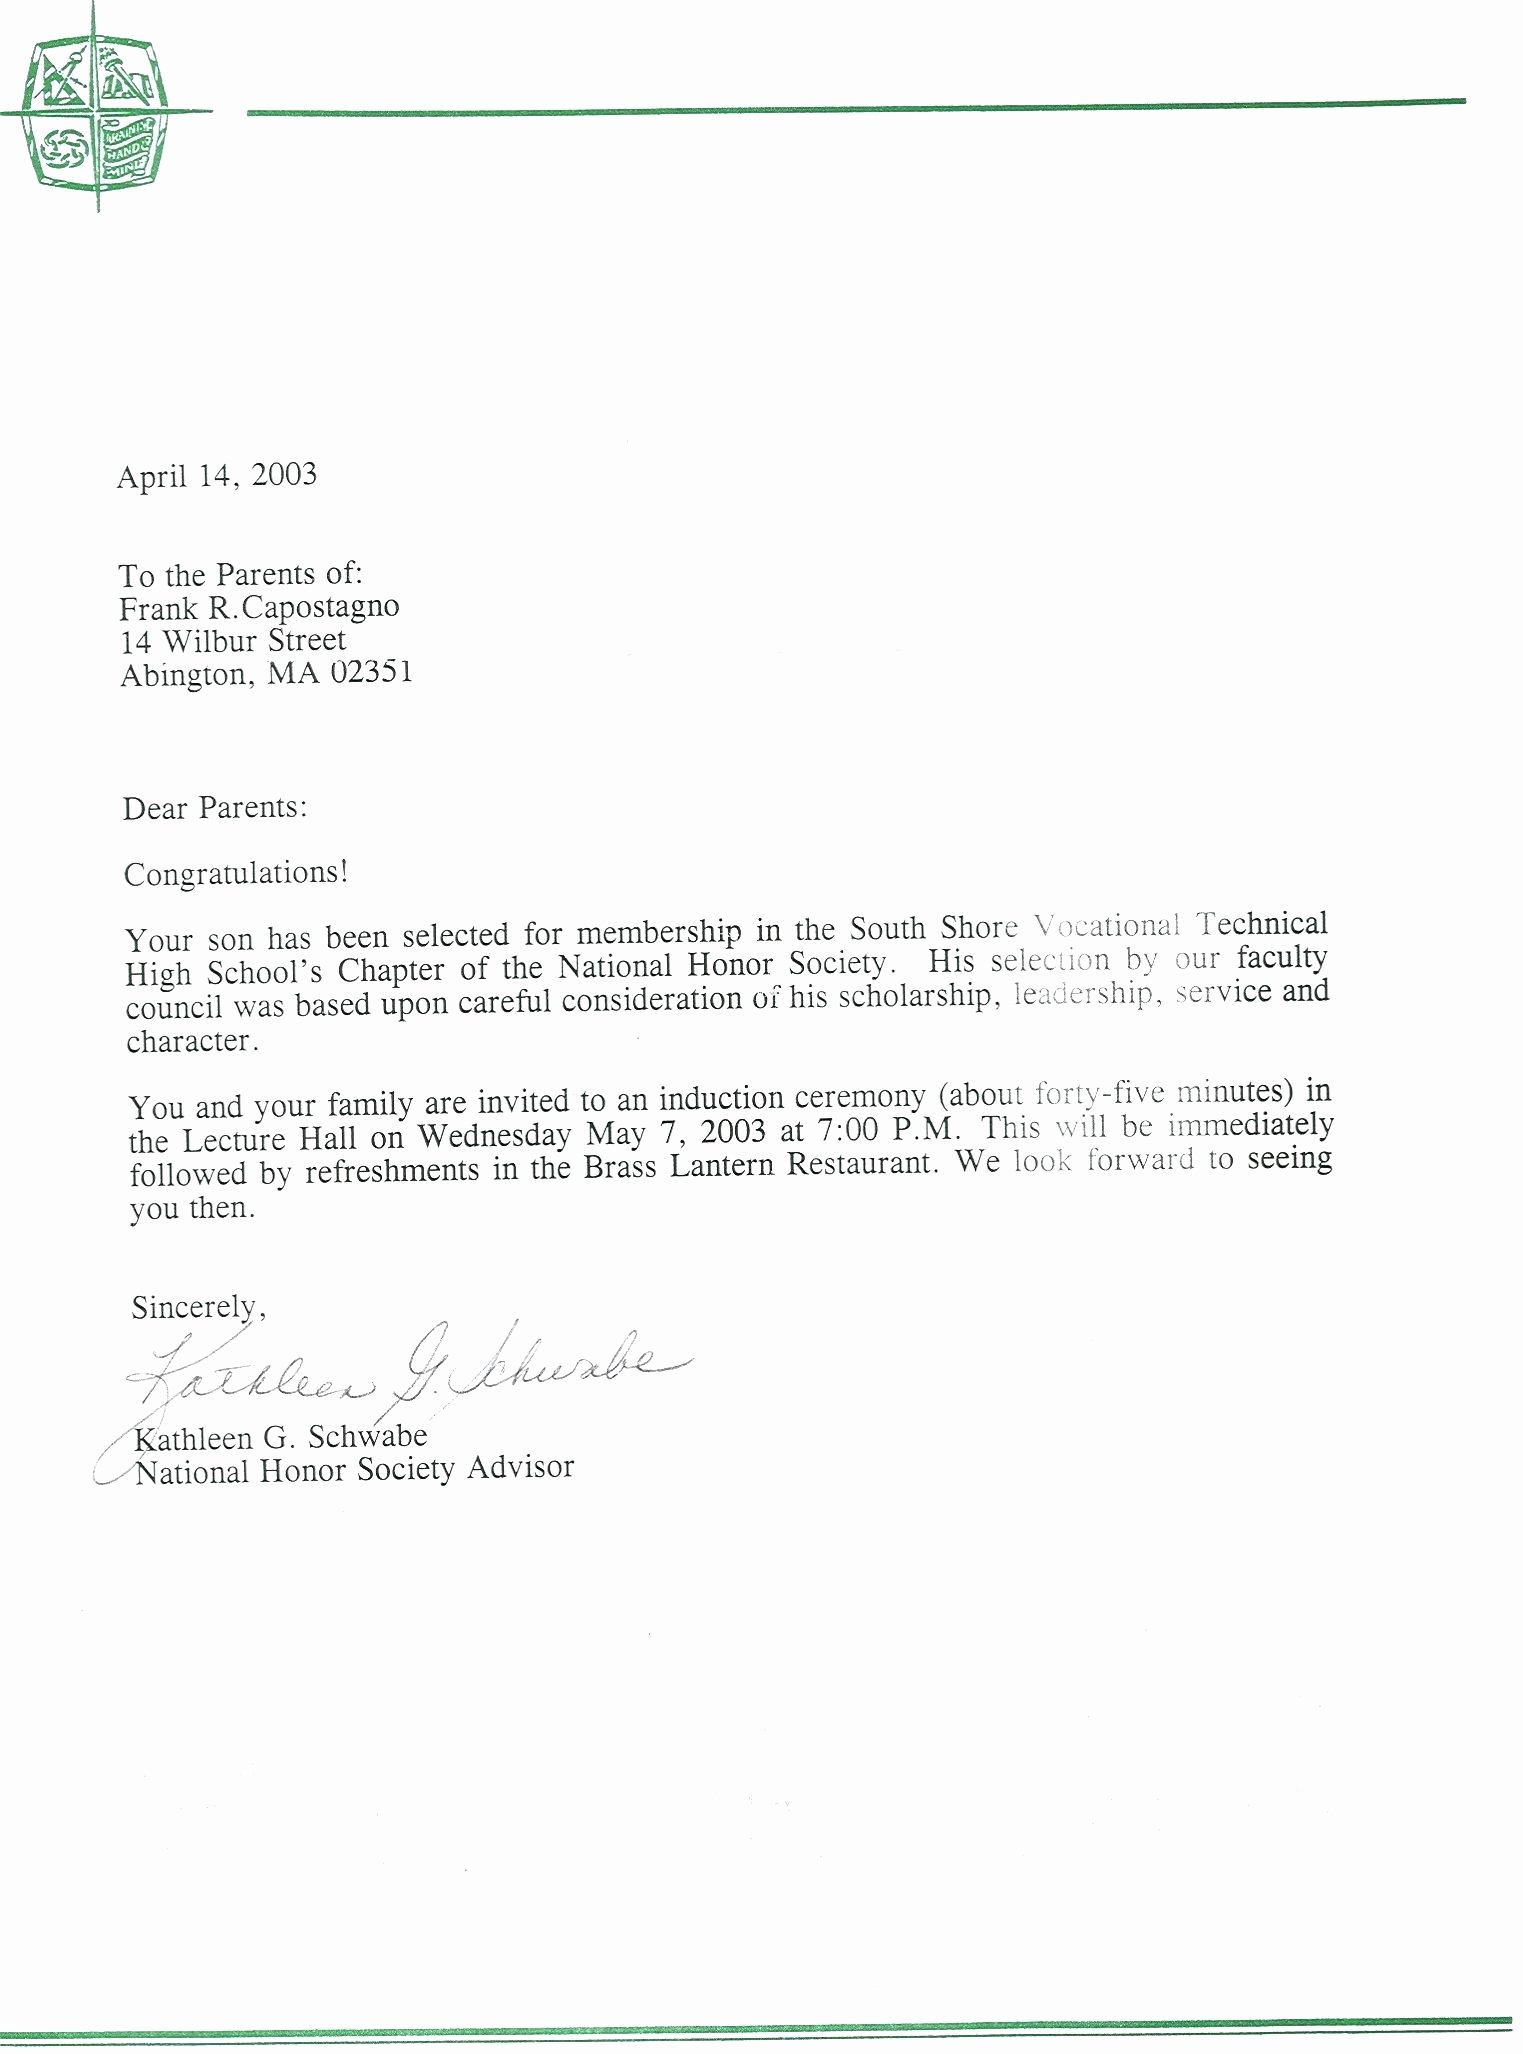 Nhs Letter Of Recommendation Sample Awesome Nhs Letter Re Mendation Template Examples